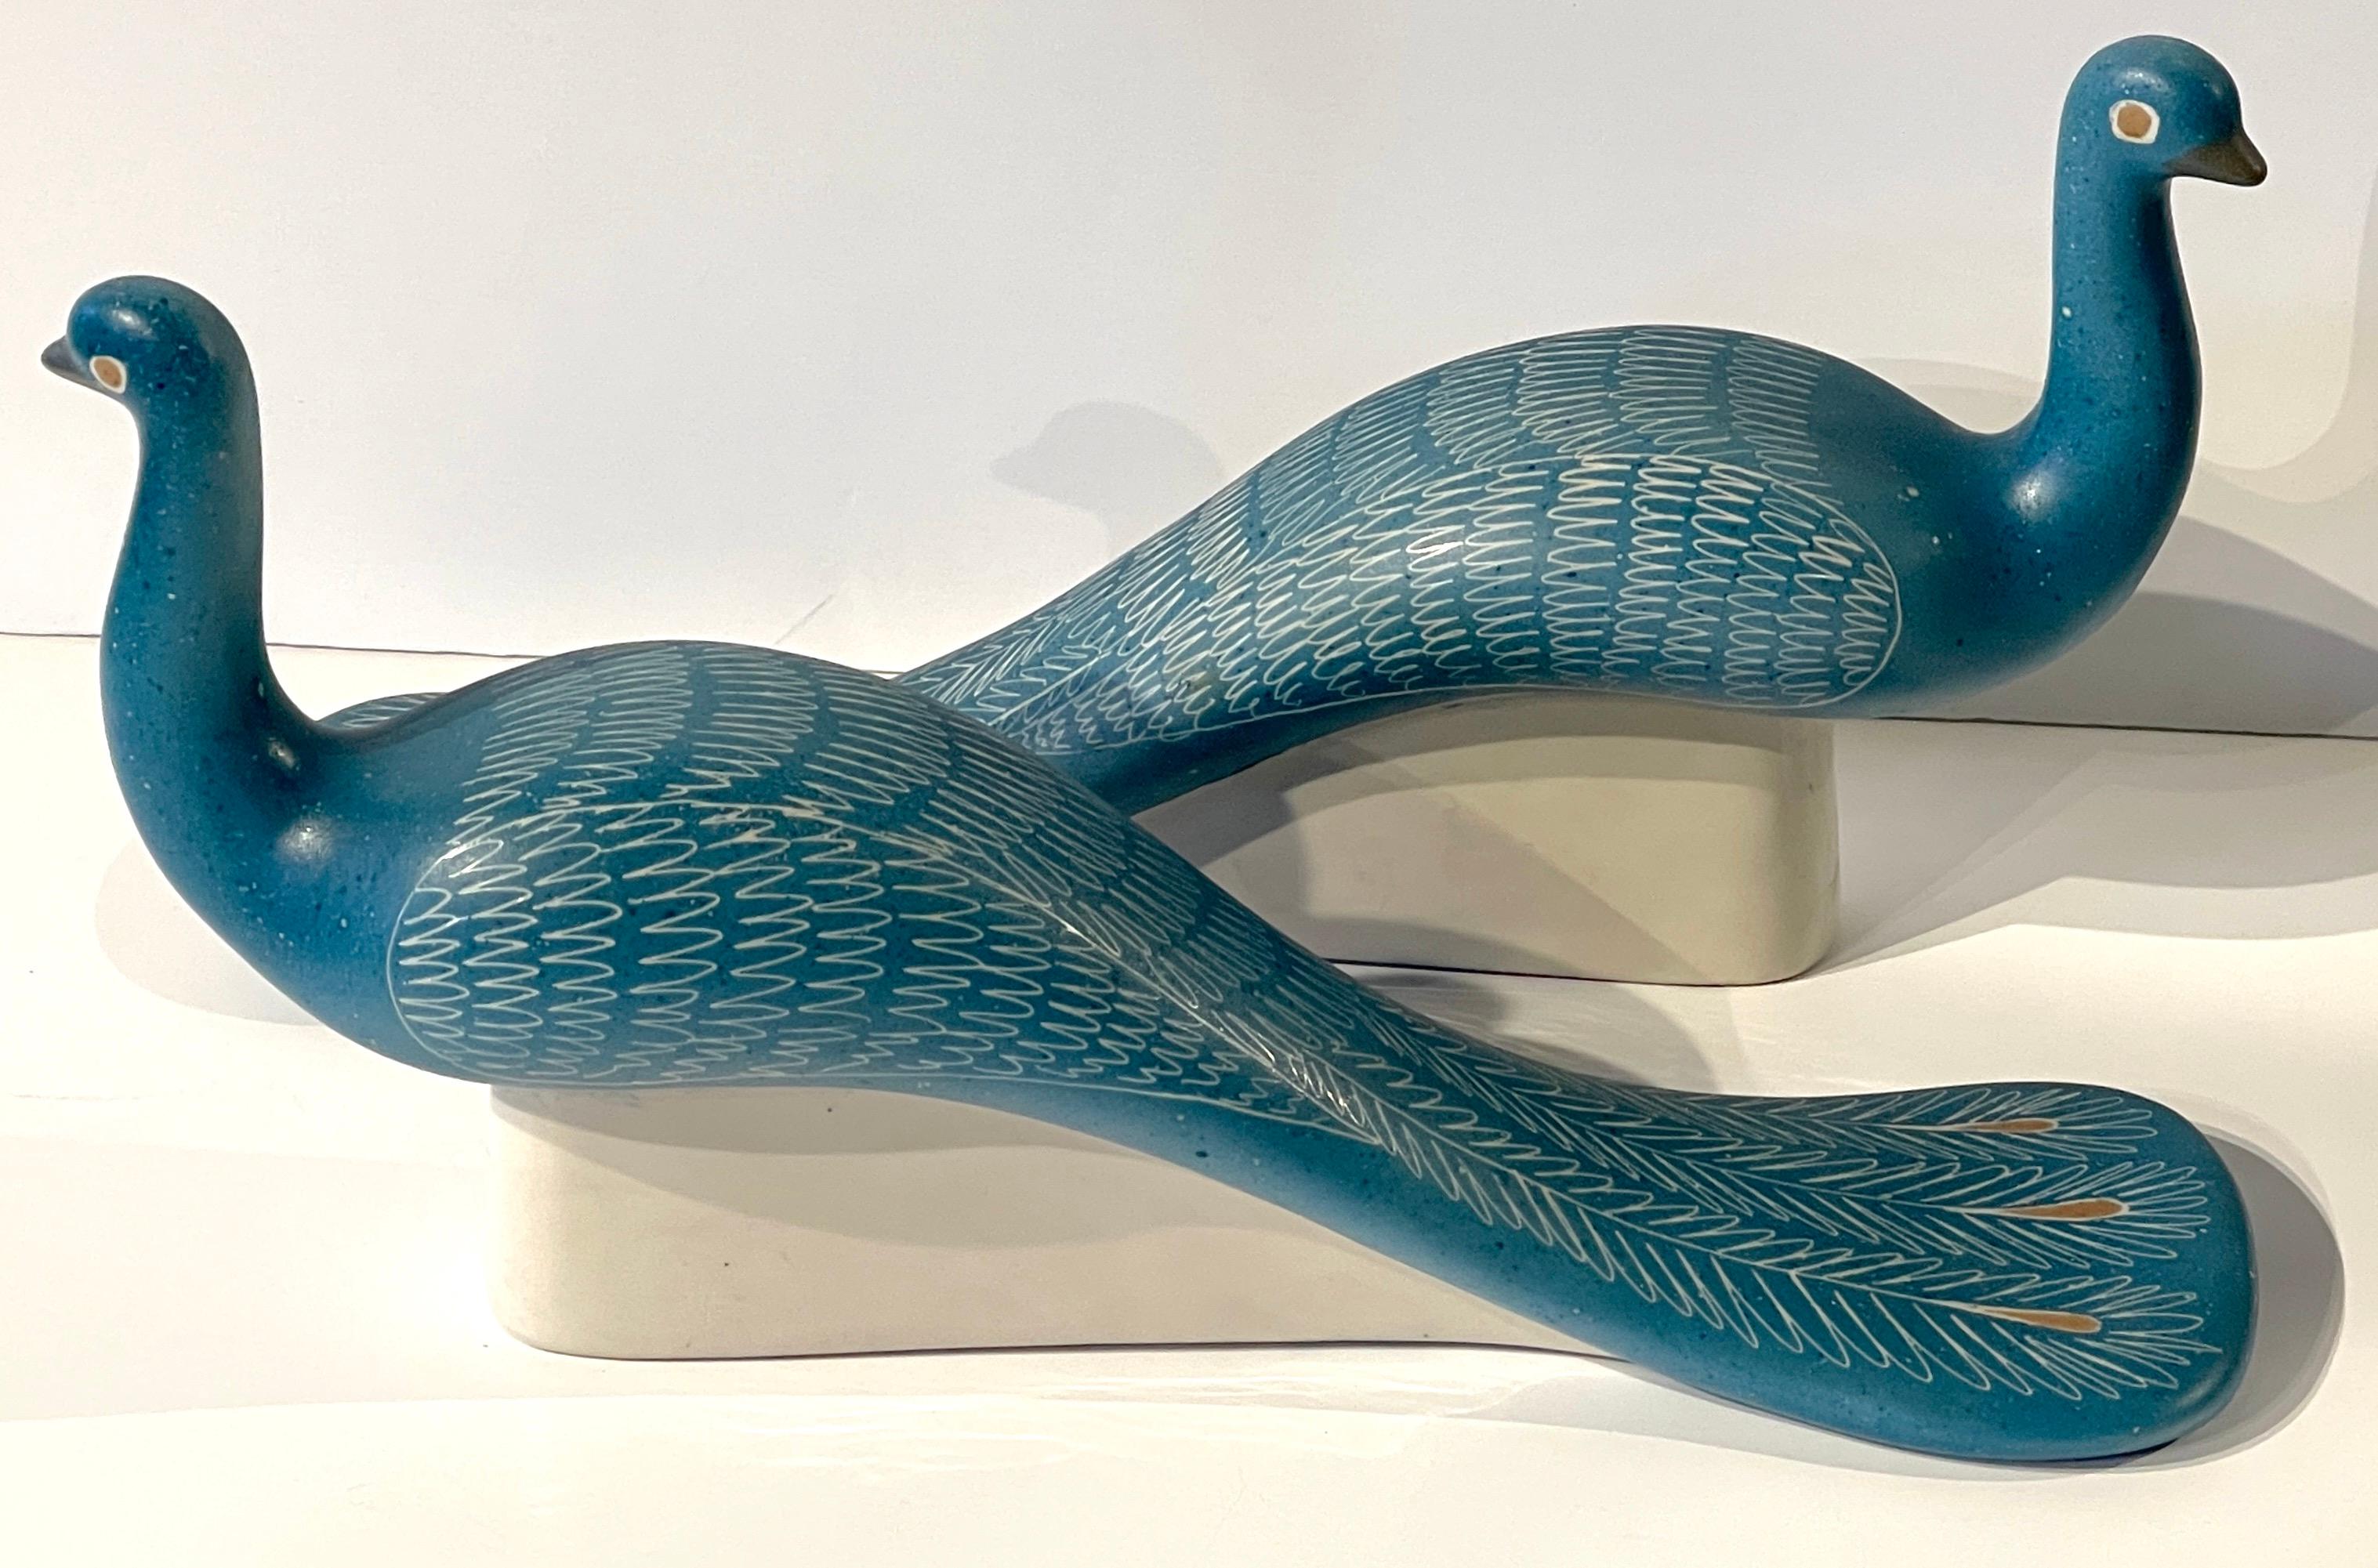 Pair of Blue Peacocks Sculptures, by Waylande Gregory In Good Condition For Sale In West Palm Beach, FL